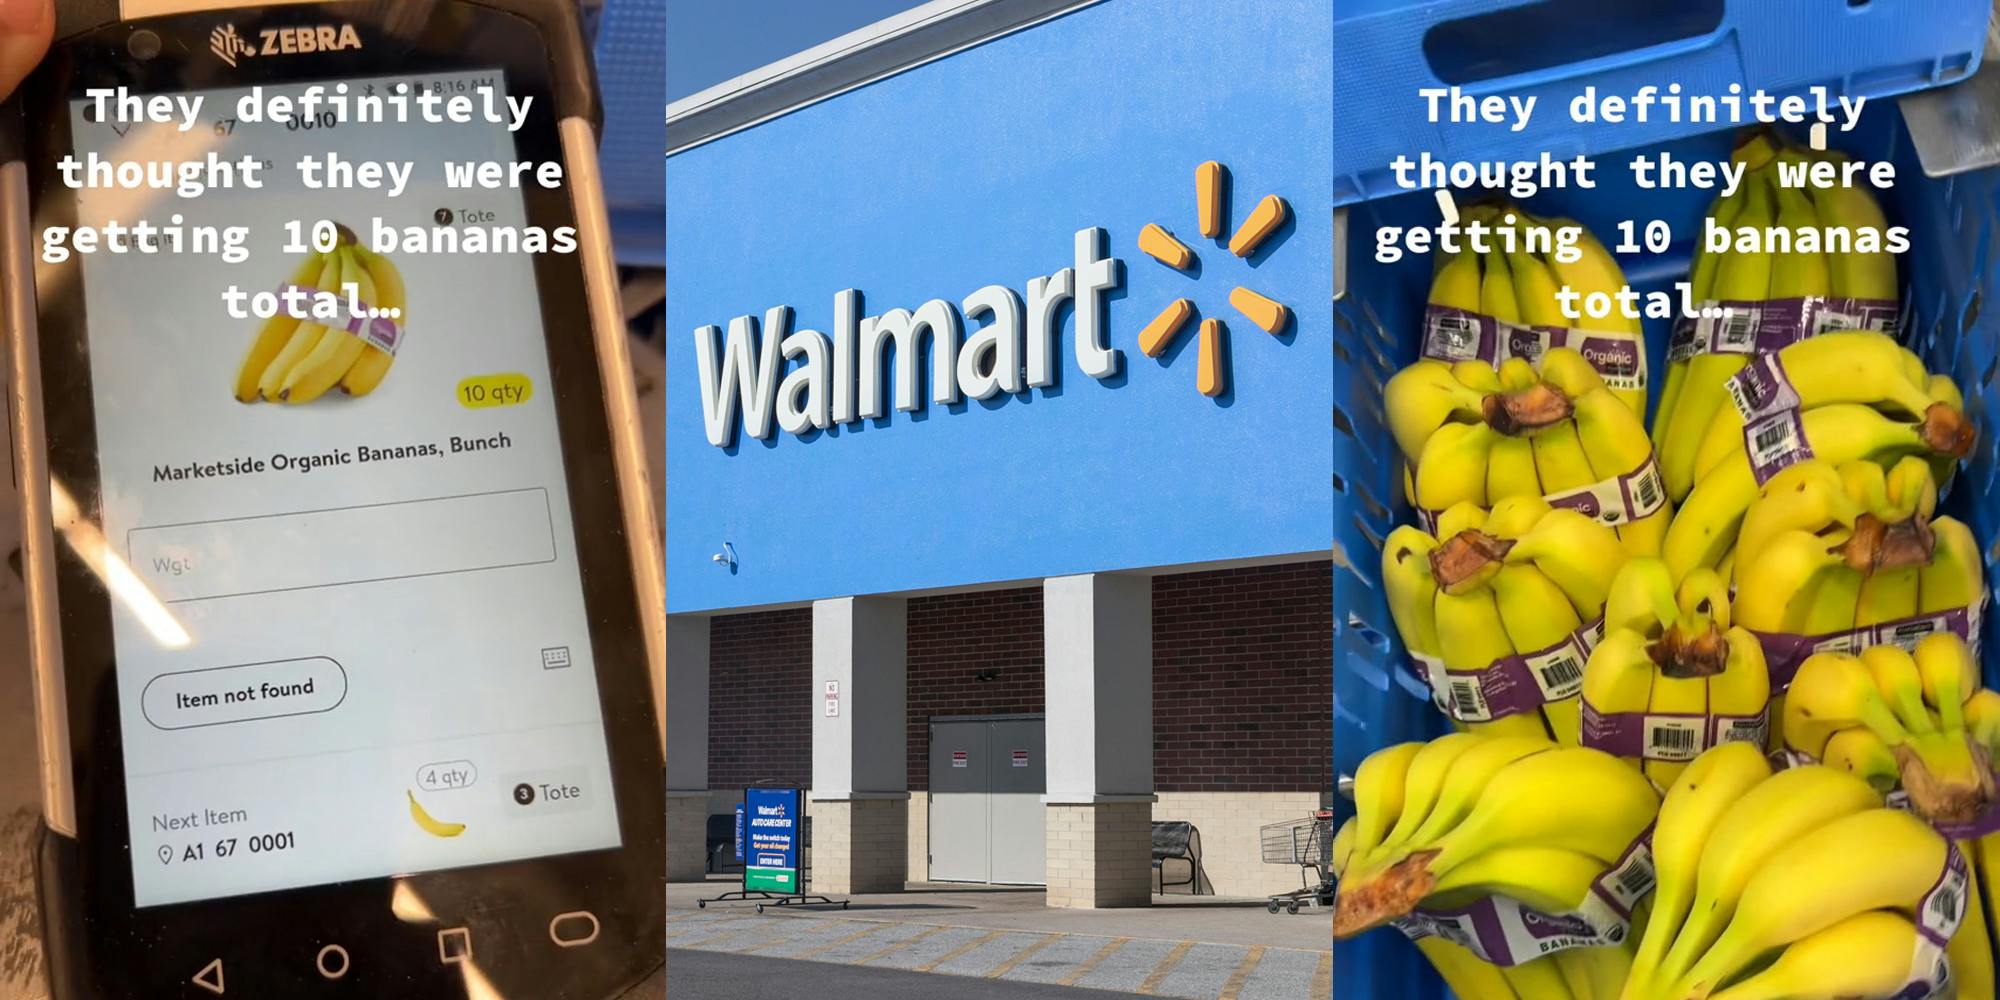 Walmart worker's zebra scanner with 10 bundles of bananas order on screen with caption "They definitely thought they were getting 10 bananas total..." (l) Walmart building with sign (c) 10 bundles of bananas in blue crate with caption "They definitely thought they were getting 10 bananas total..." (r)